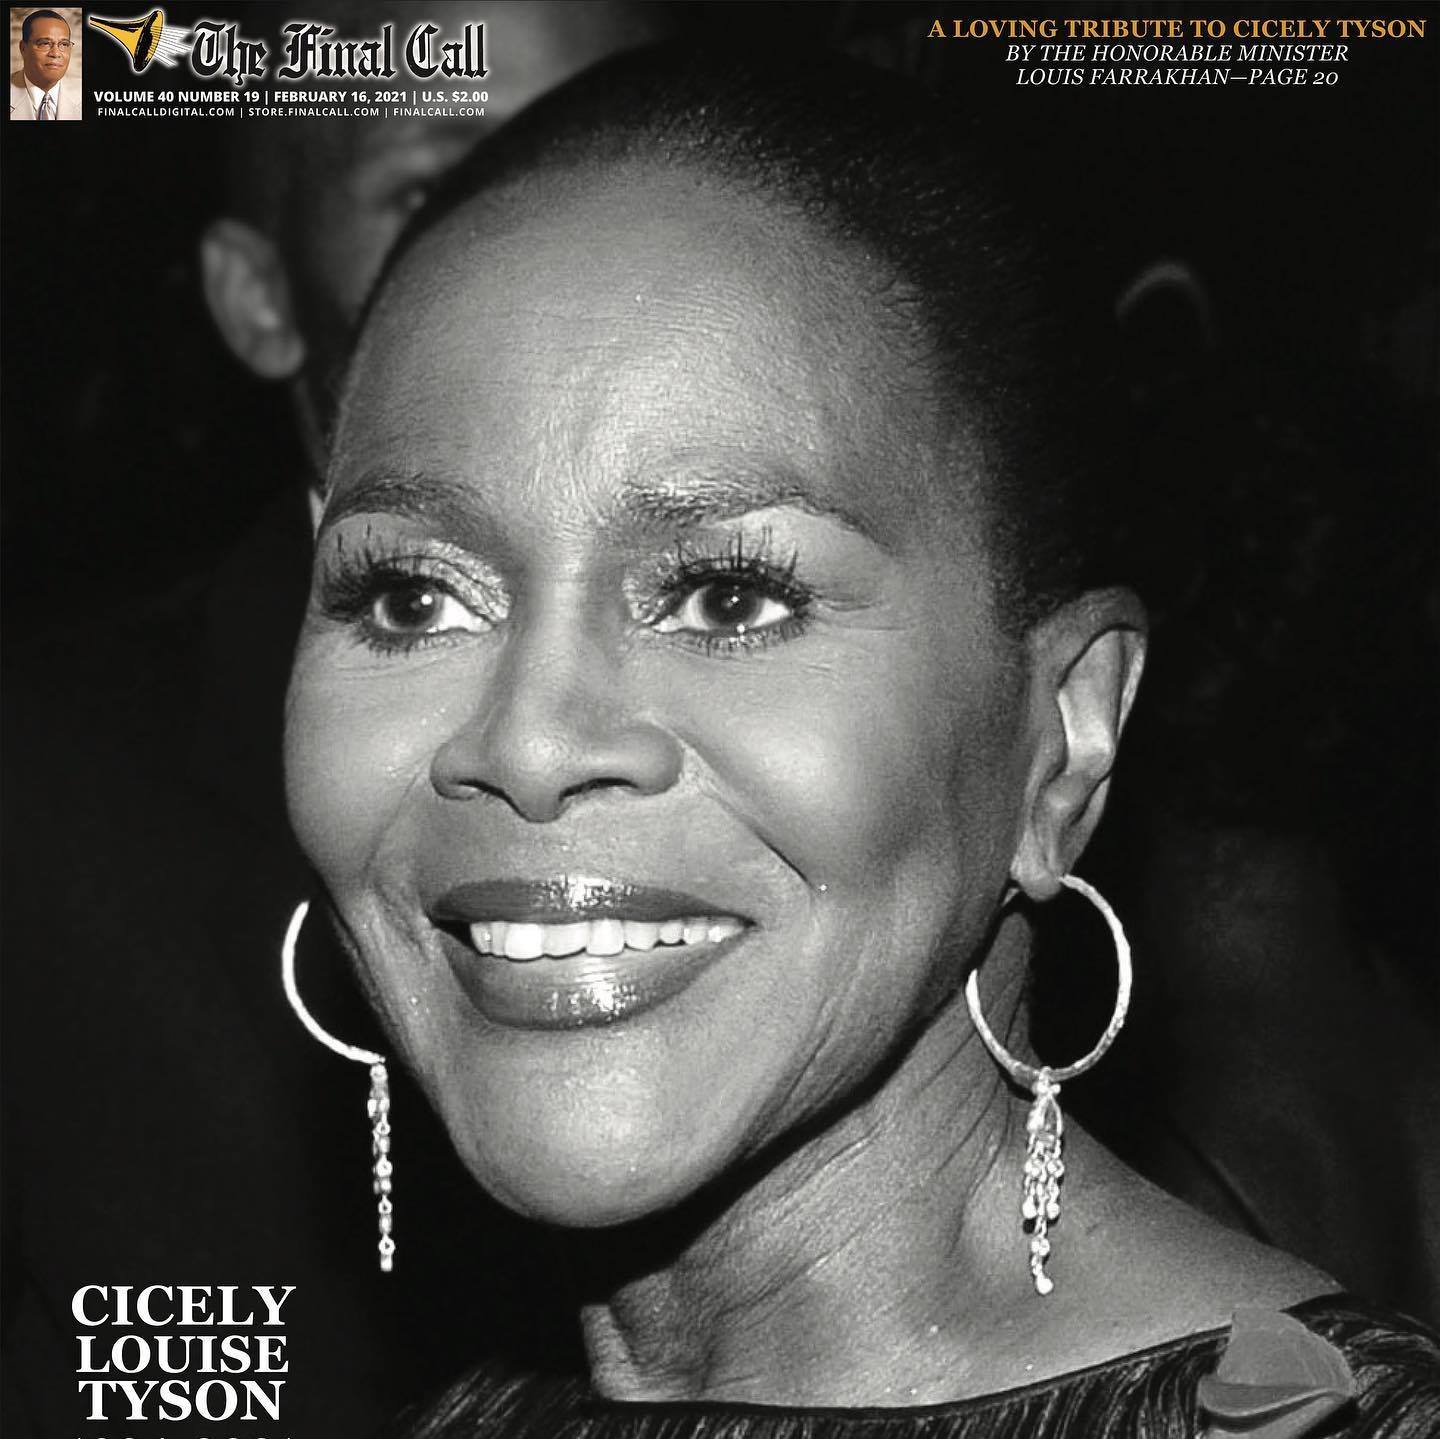 A Loving Tribute to Cicely Tyson Final Call Newspaper